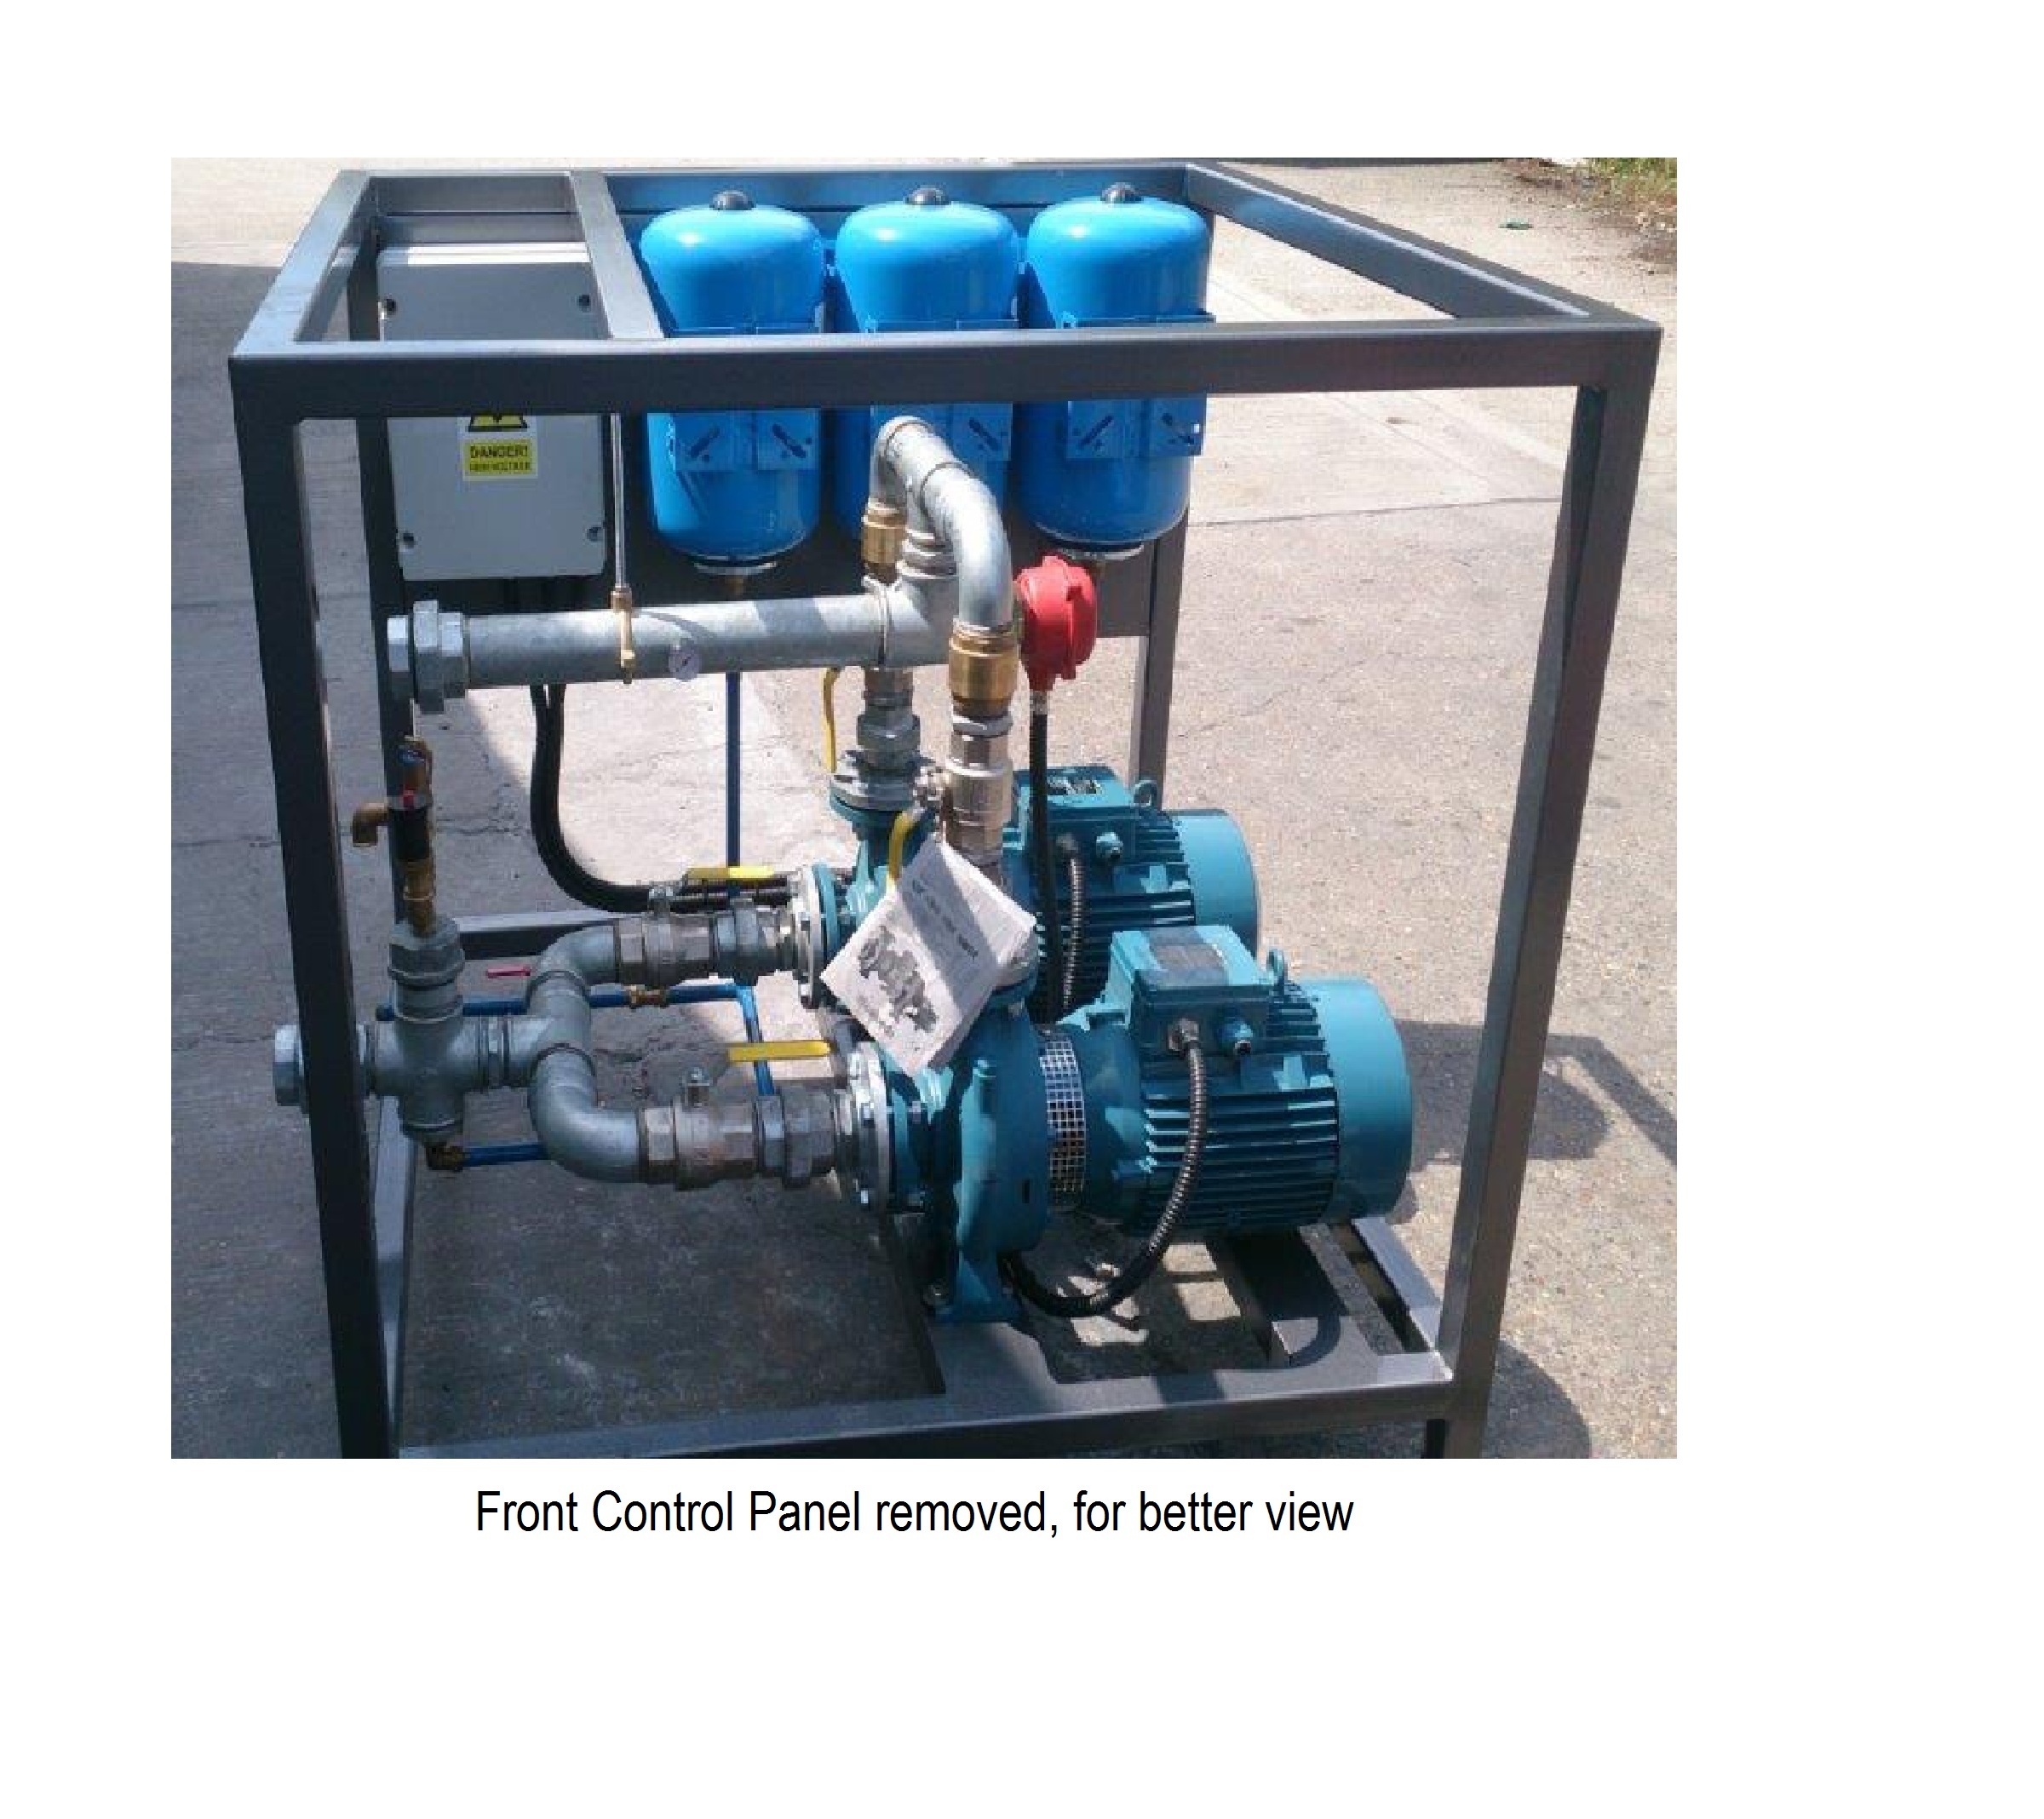 folder overdraw Site line Water cooling pump module for 125kW system, two pumps, Induction Furnace  Spare Parts